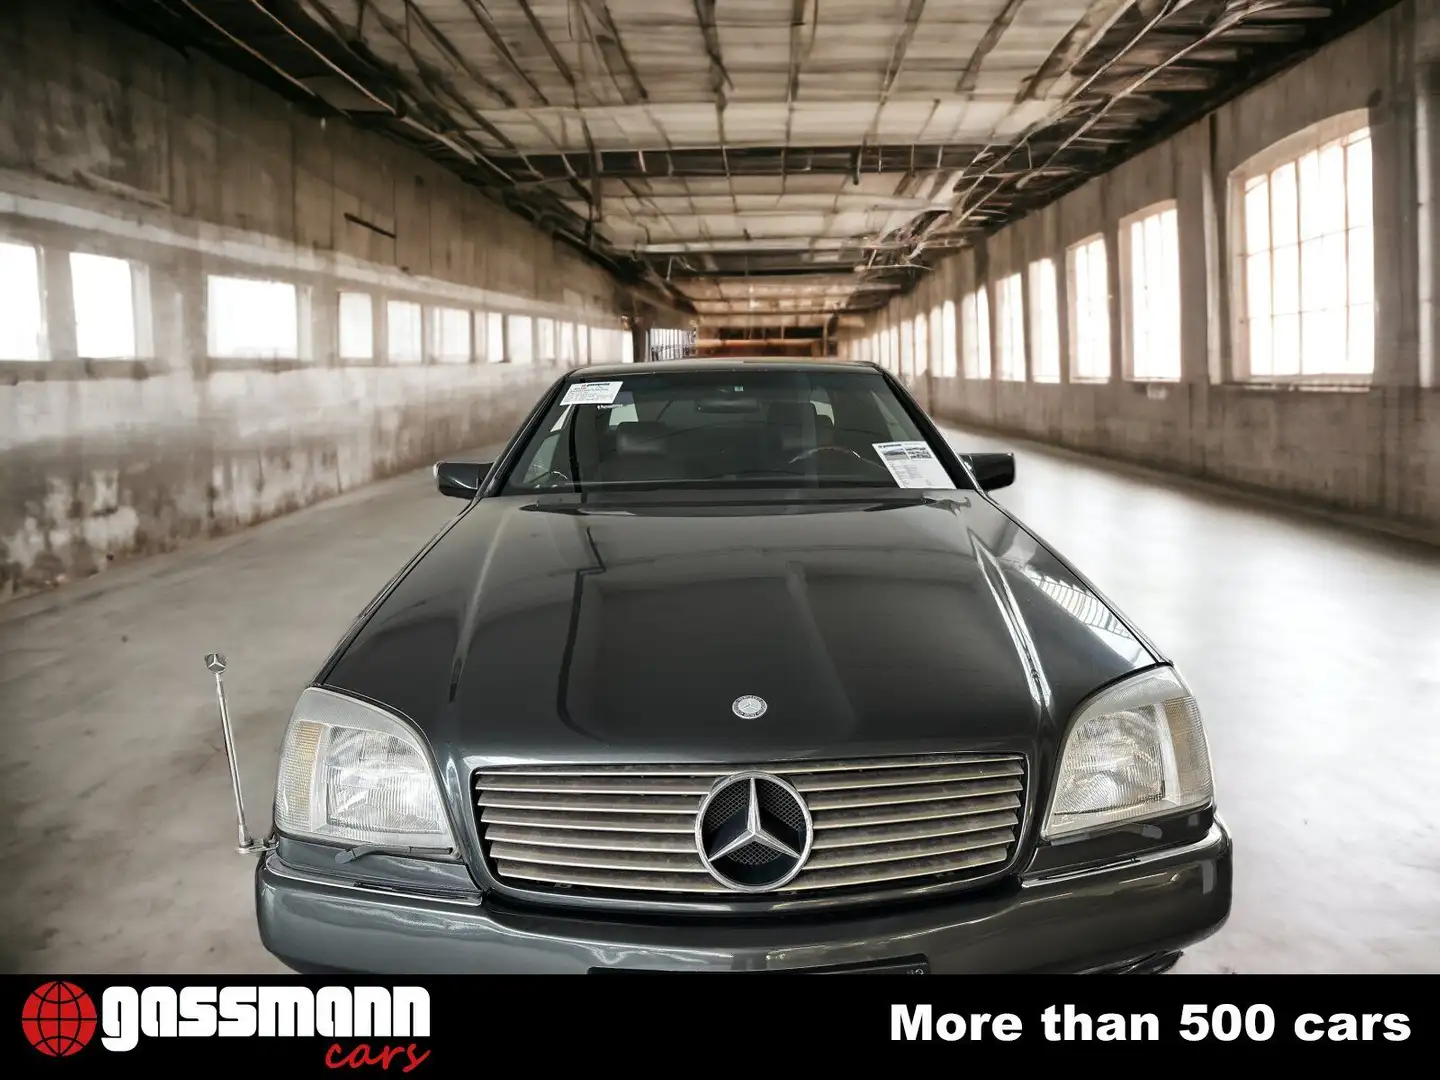 Mercedes-Benz S 600 Coupe / CL 600 Coupe / 600 SEC C140 crna - 2